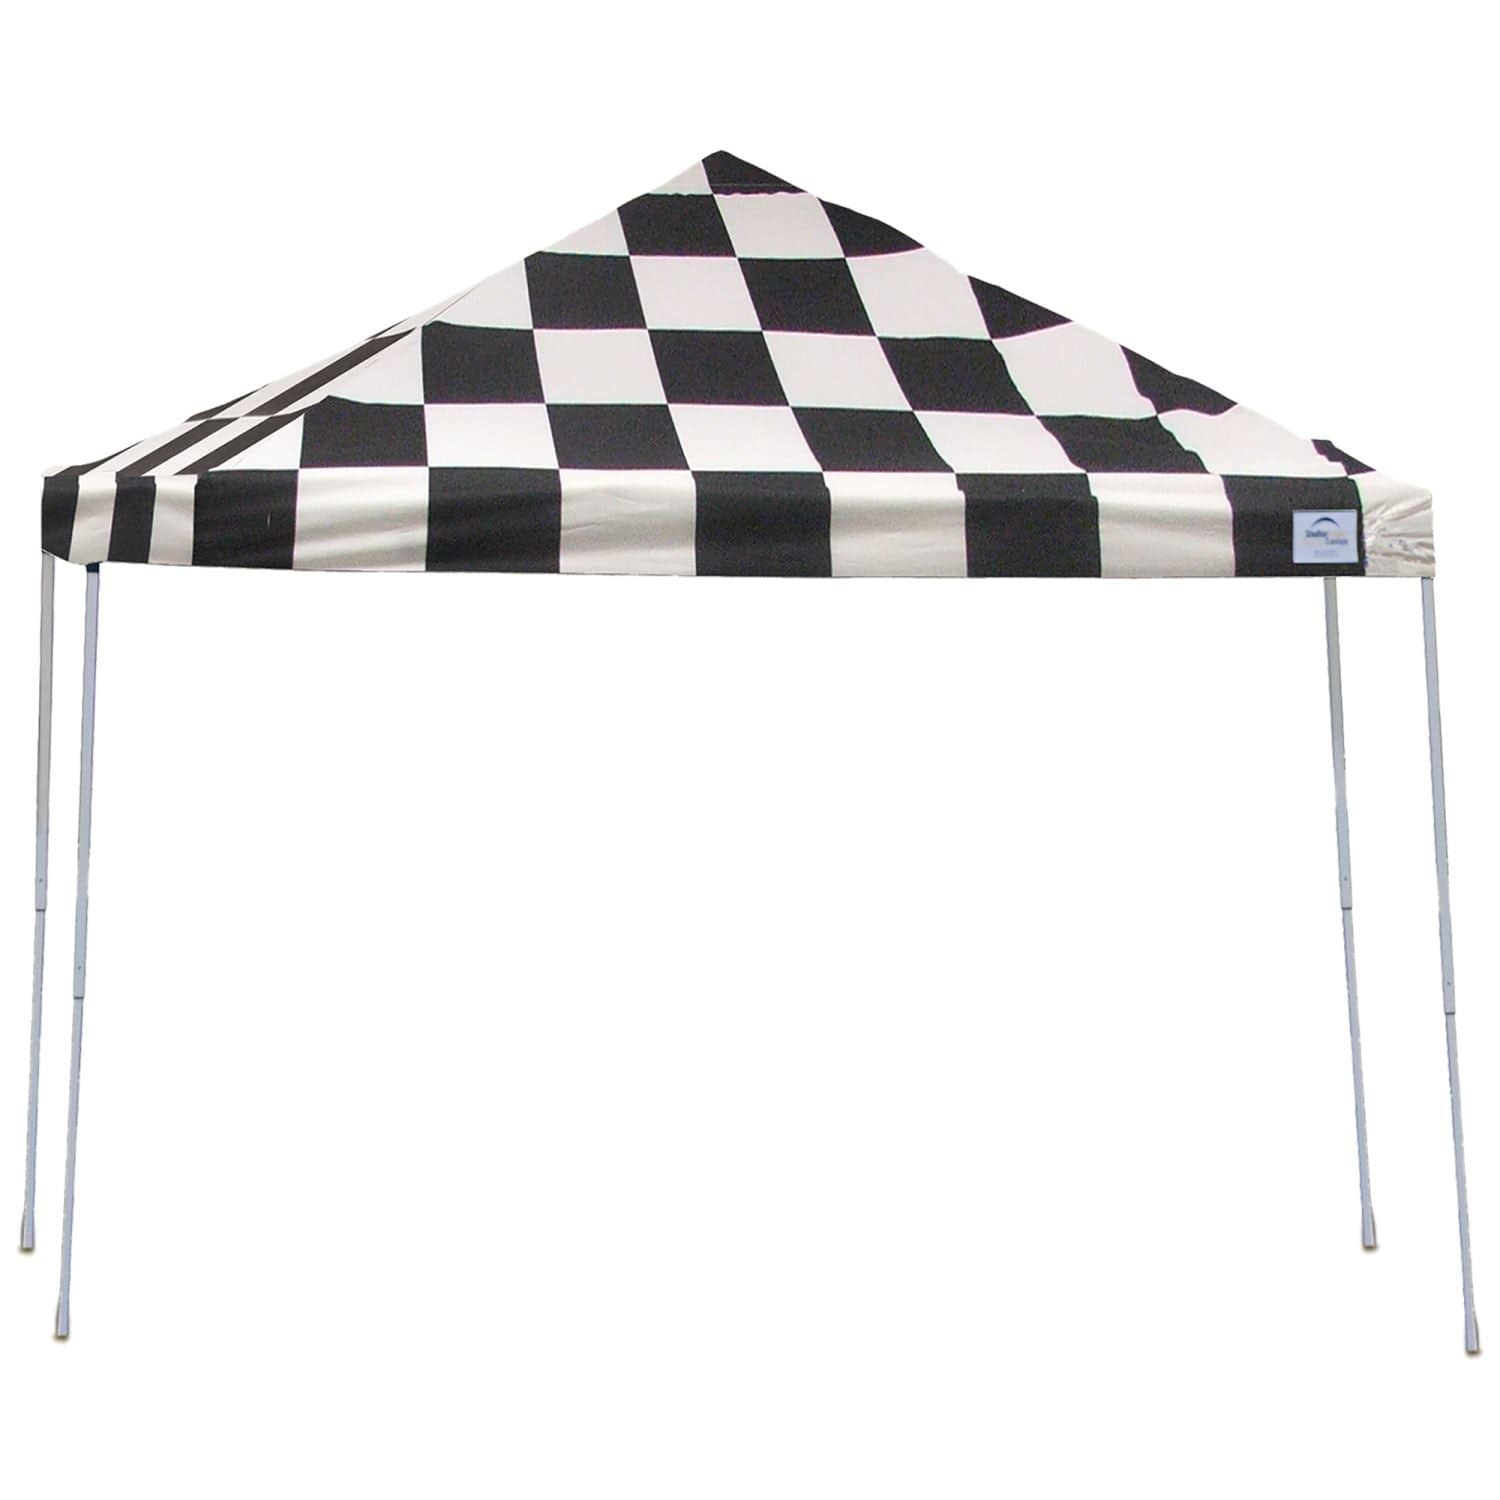 The Fulfiller Pop-Up Canopies ShelterLogic | Pop-Up Canopy HD - Straight Leg 12 x 12 ft. Checkered Flag 22543